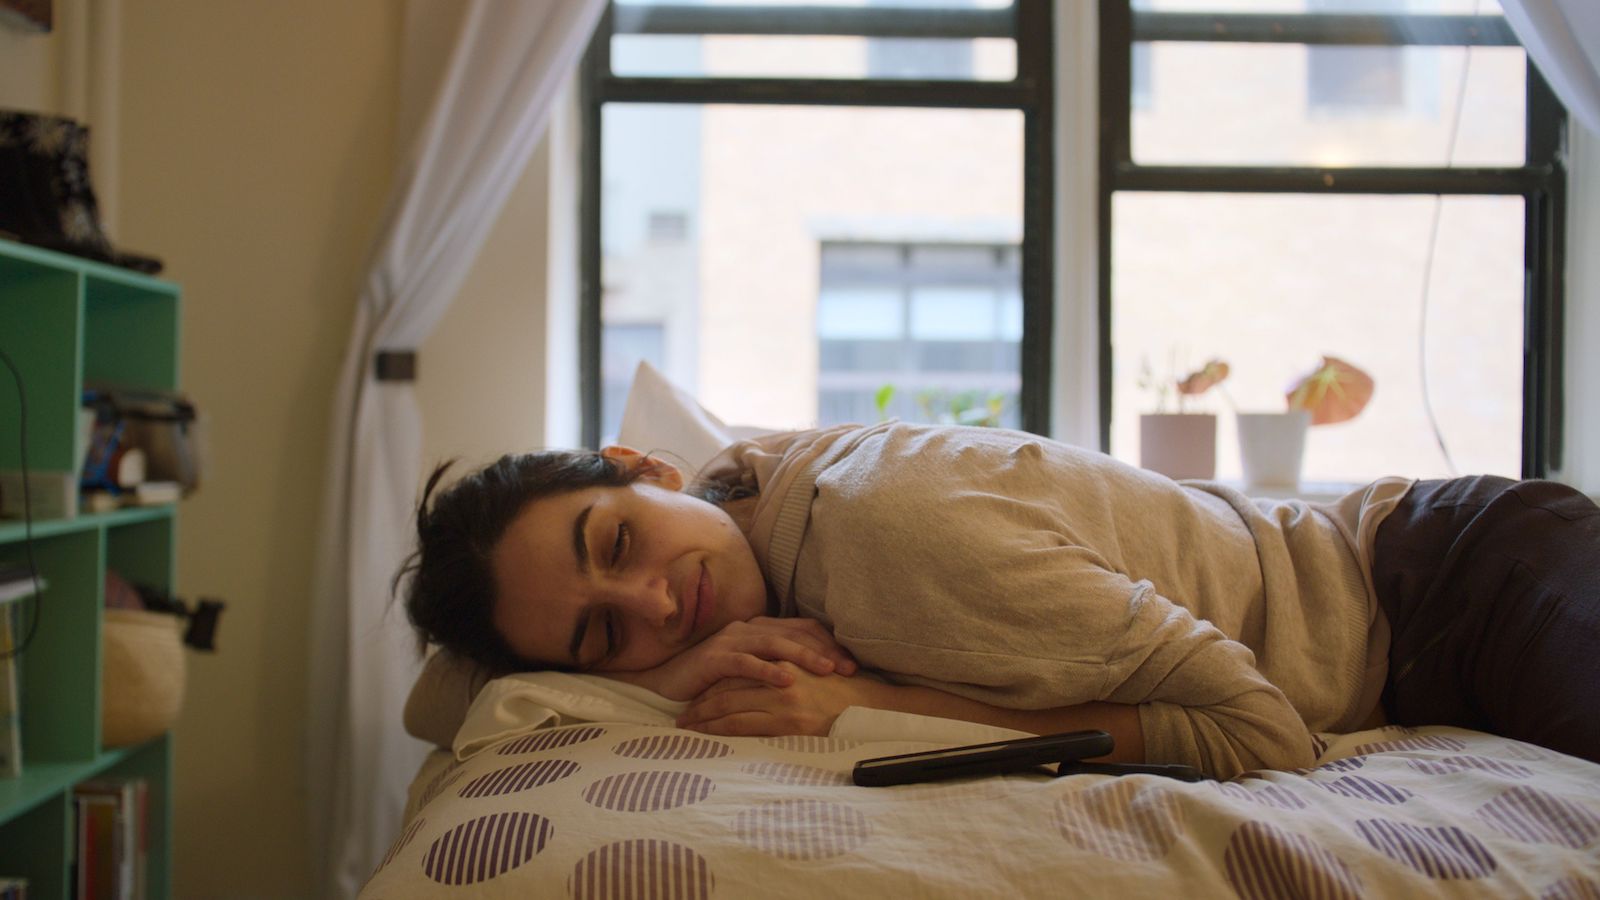 A woman lies on a bed during the daytime with her eyes closed and smiling